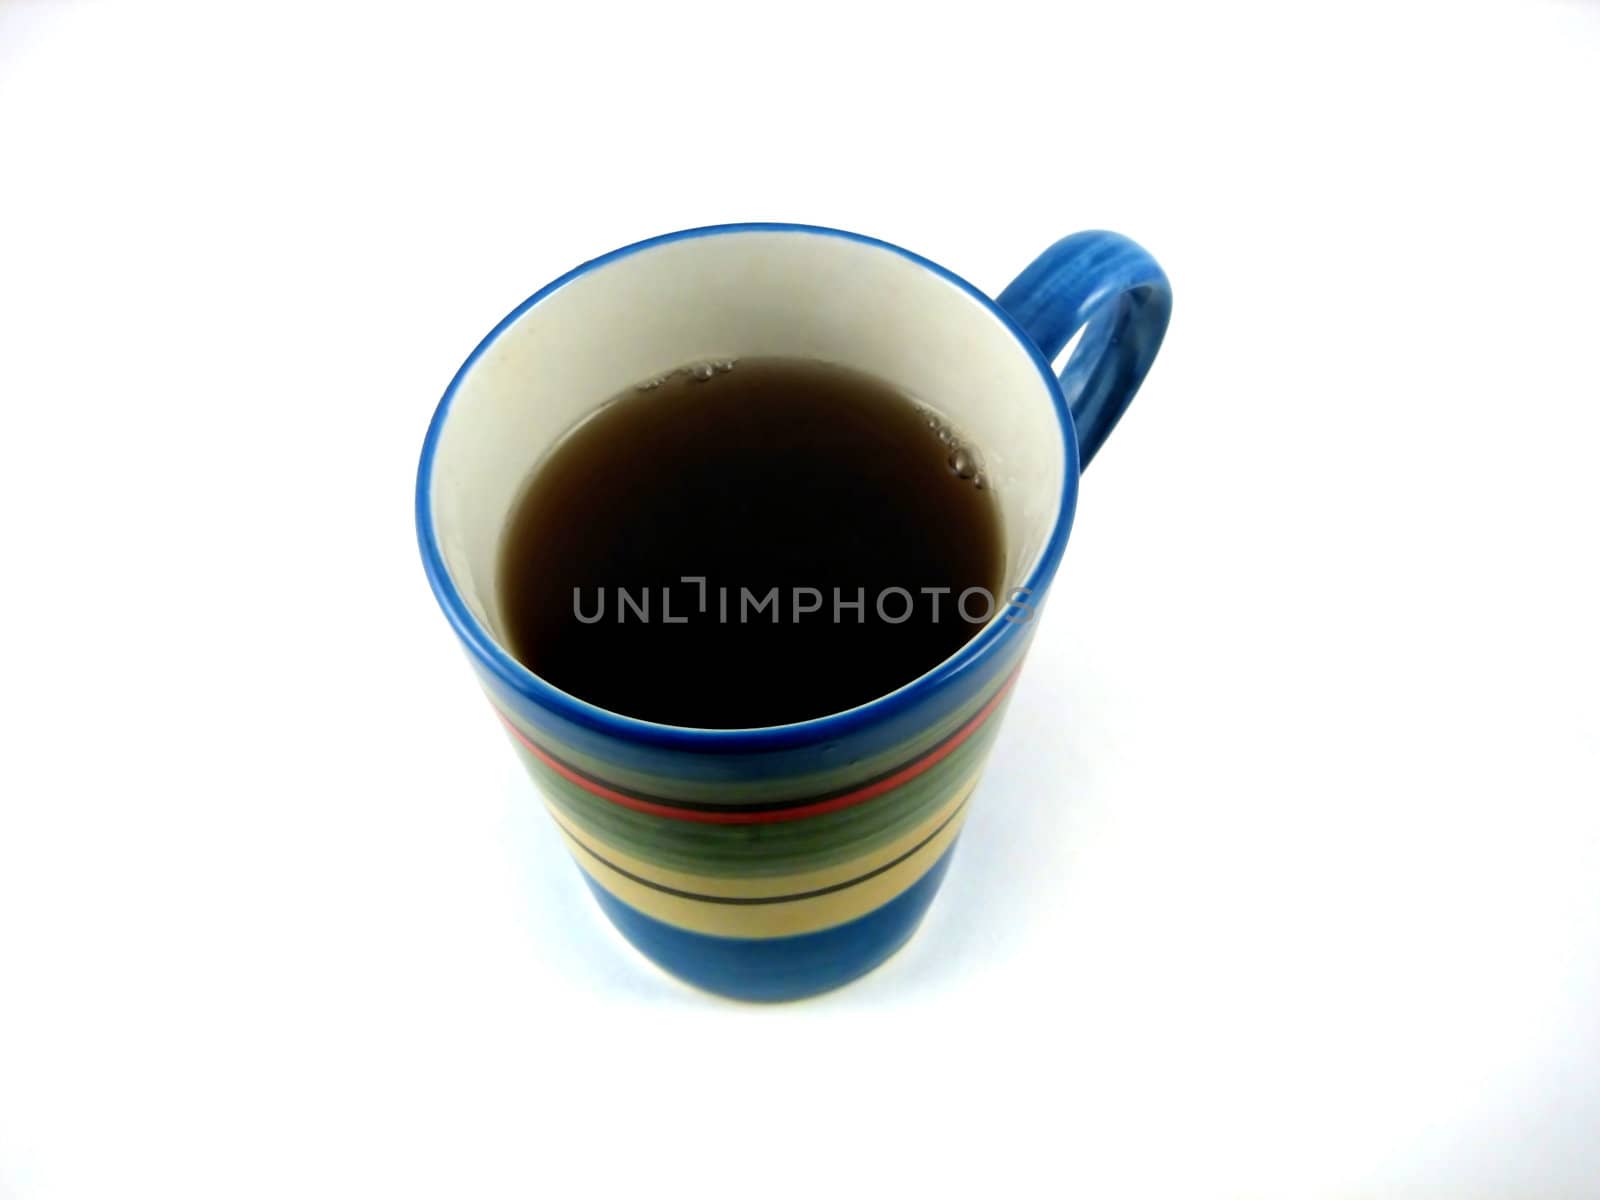 Pictures of a cup of coffee ready to be served in the morning